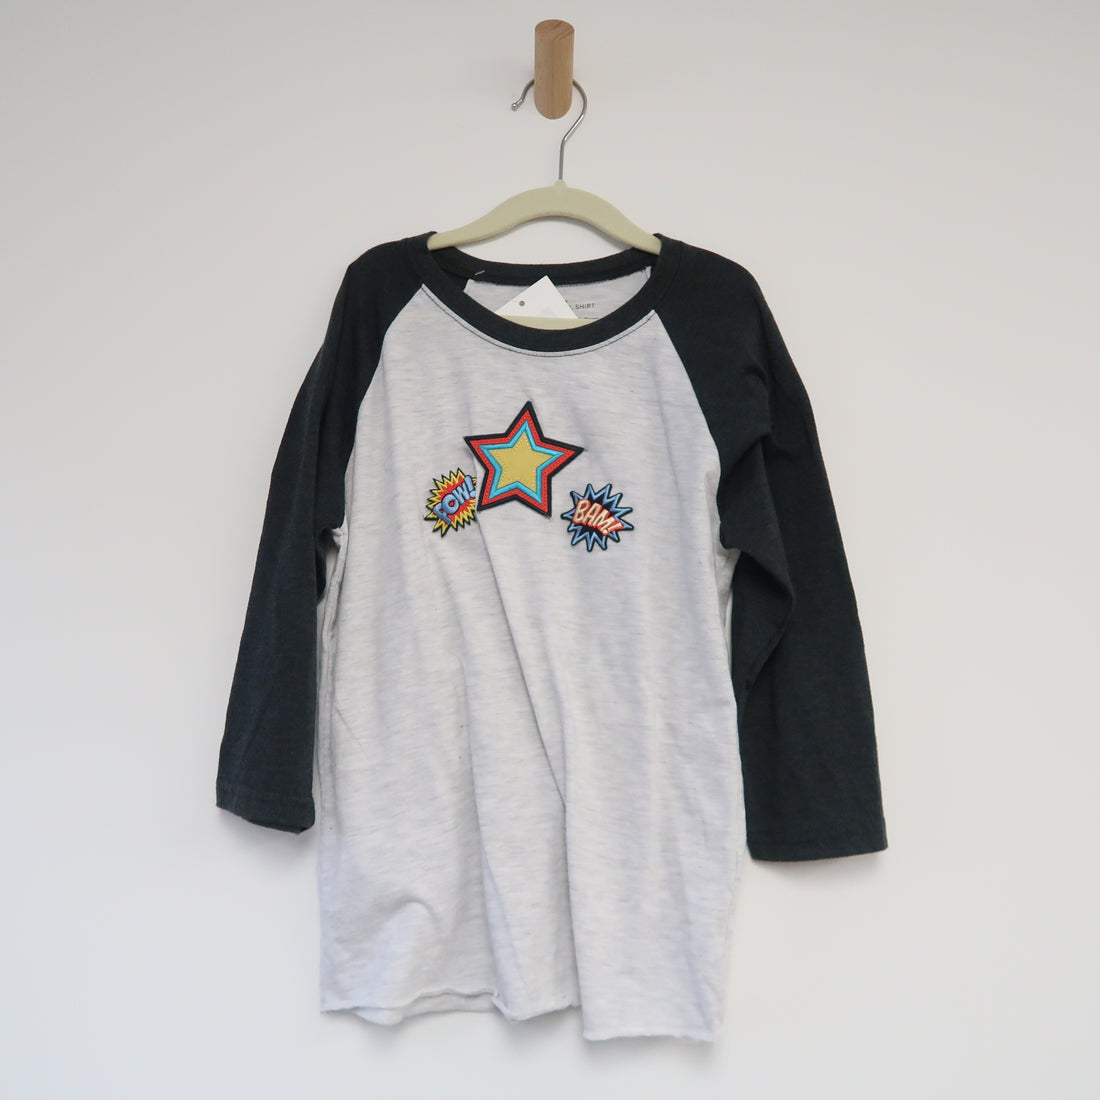 Unknown Brand - 3/4 Length Sleeve (6/7Y)